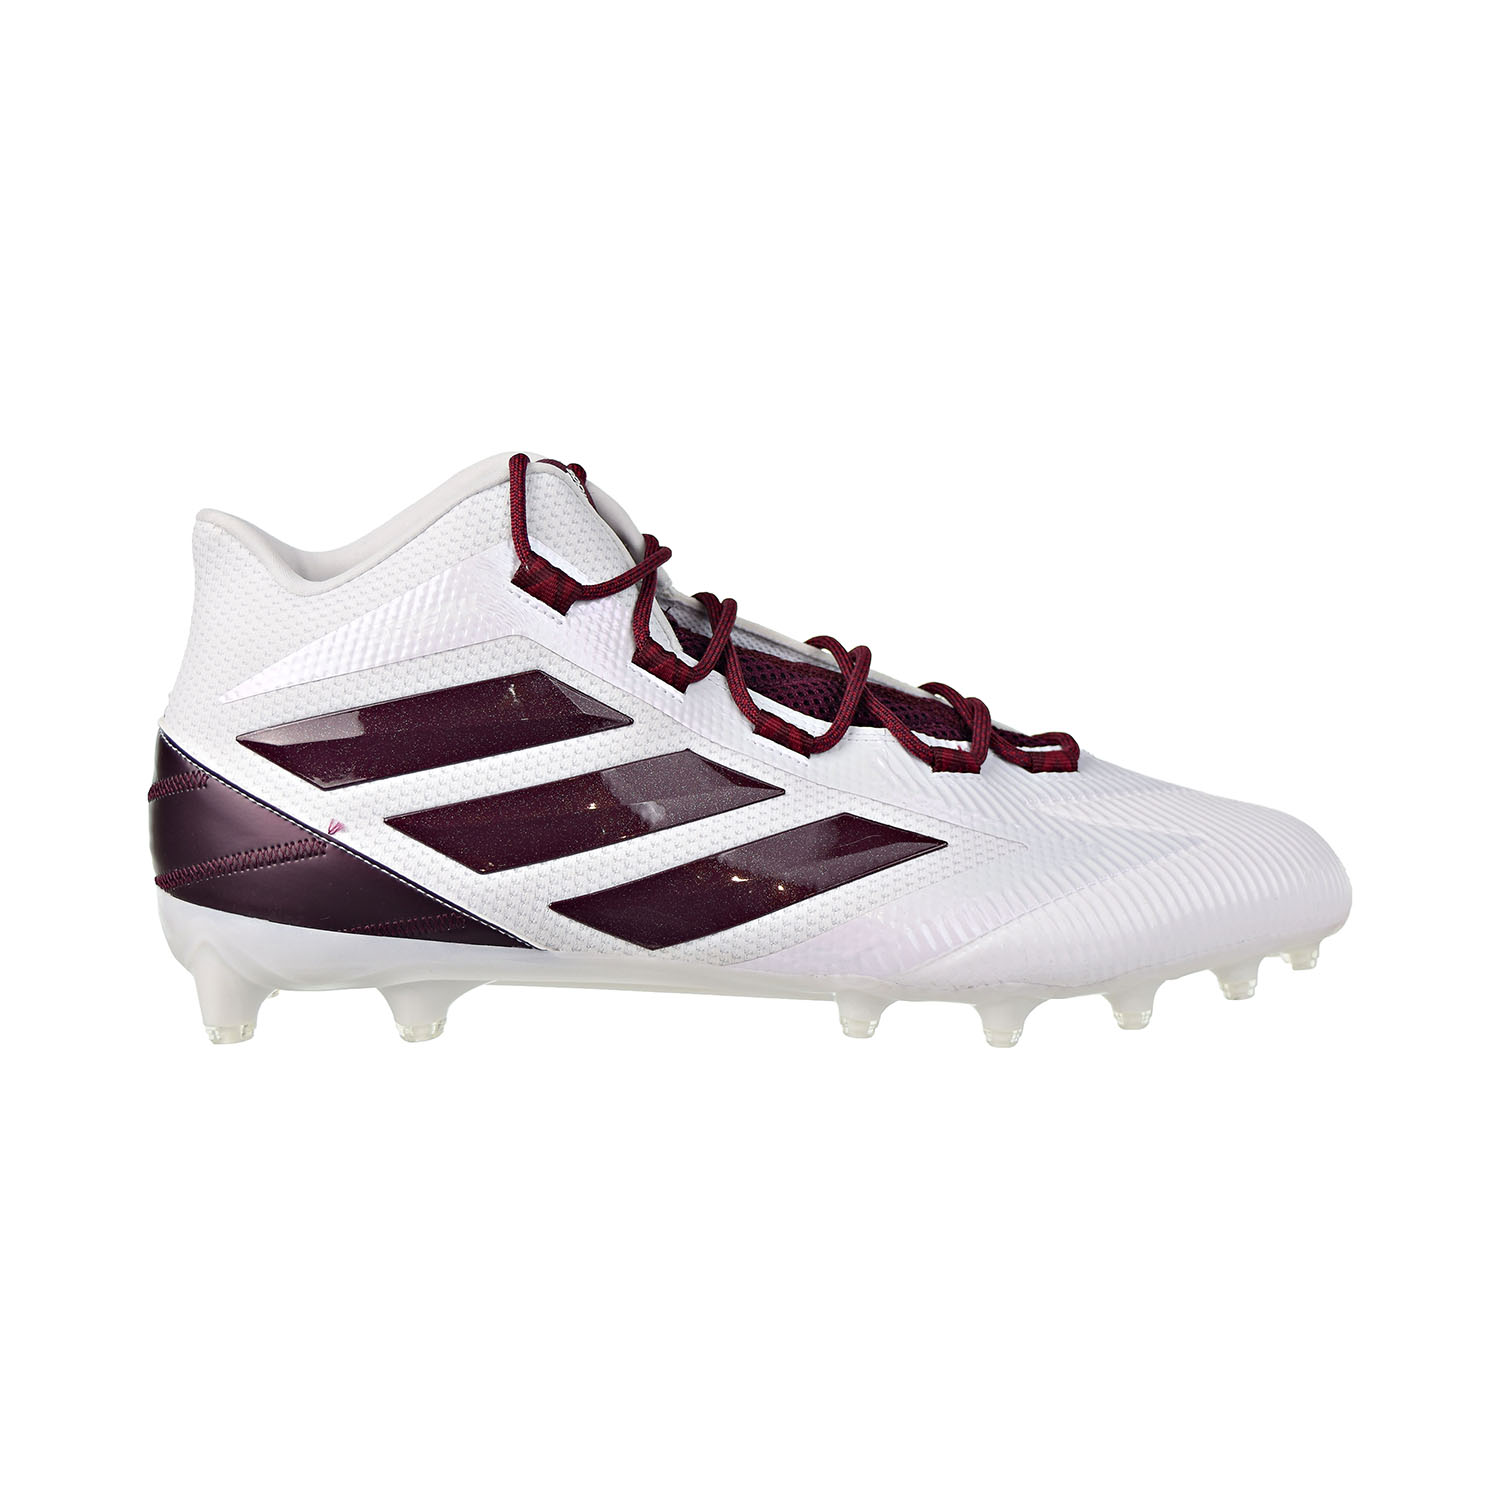 adidas football cleats maroon and white